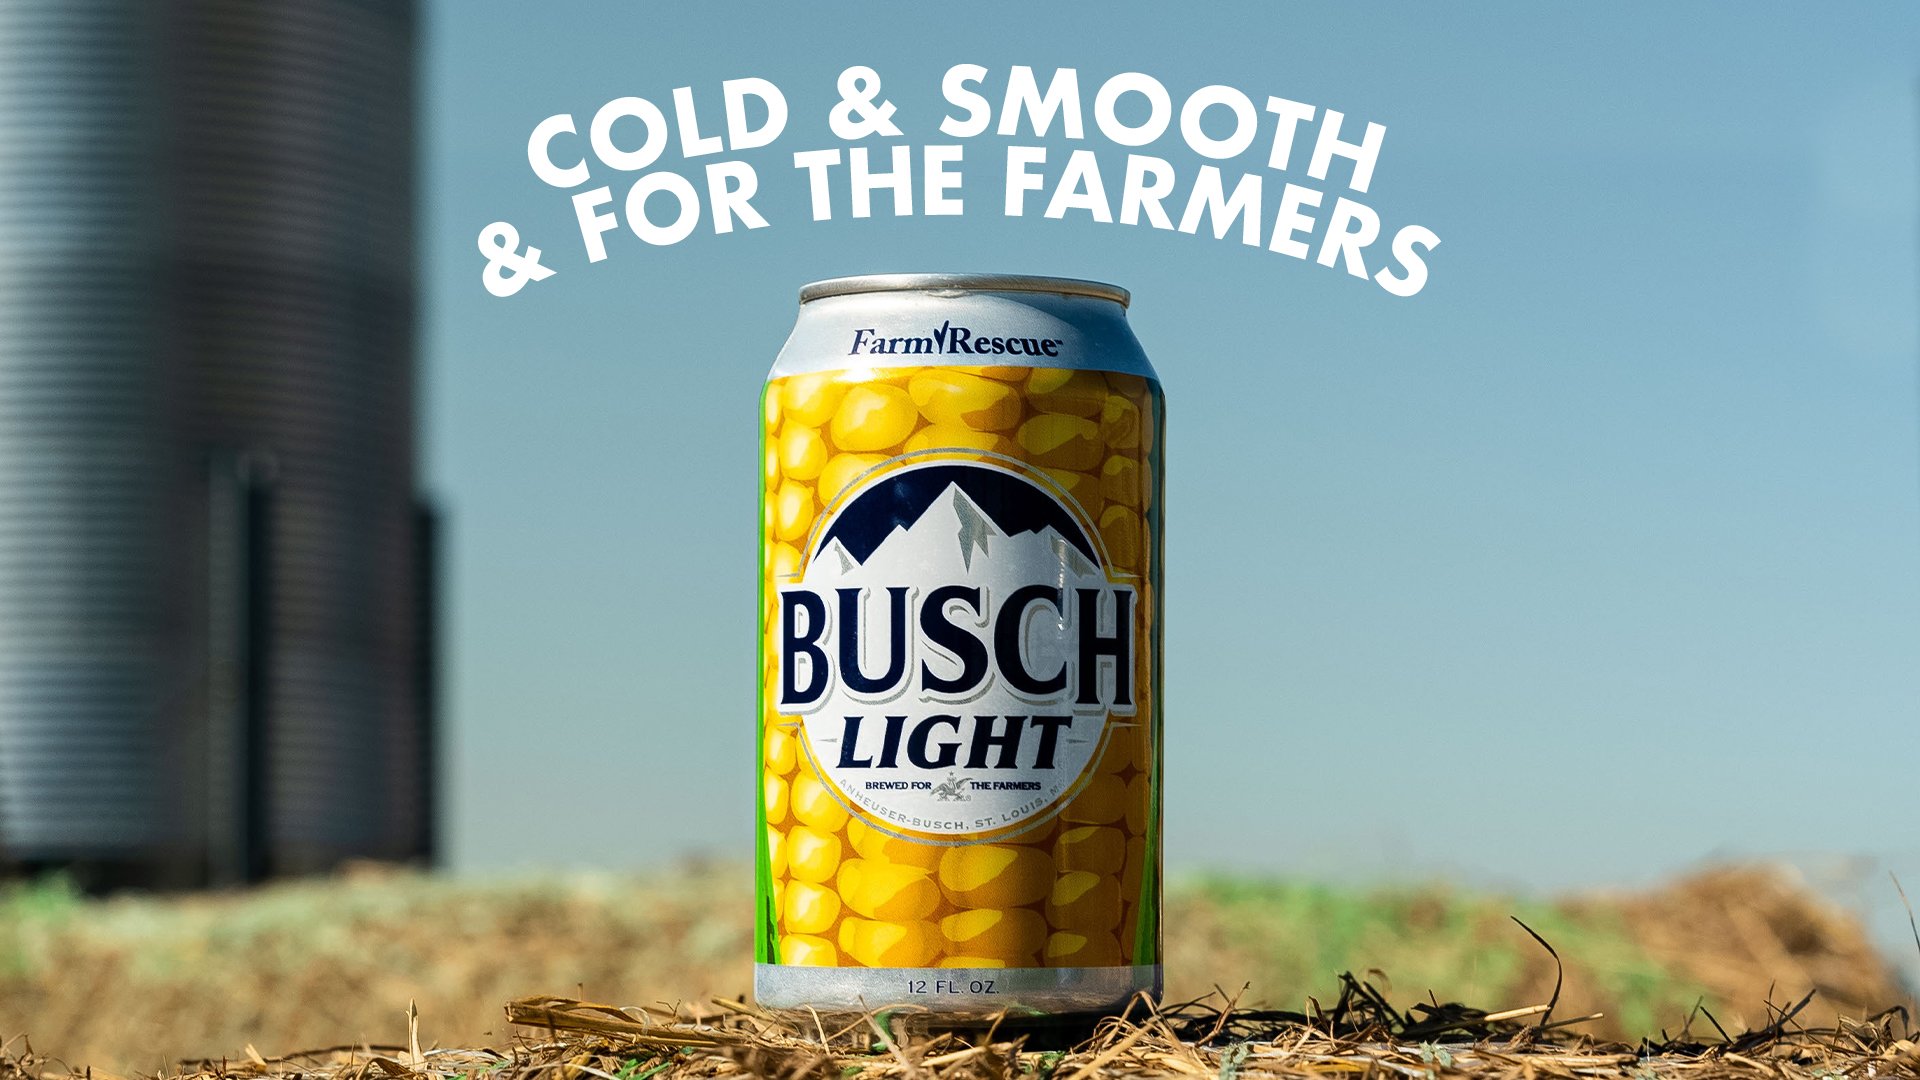 Busch Light Releases FanFavorite Corn Cans Supporting American Farmers